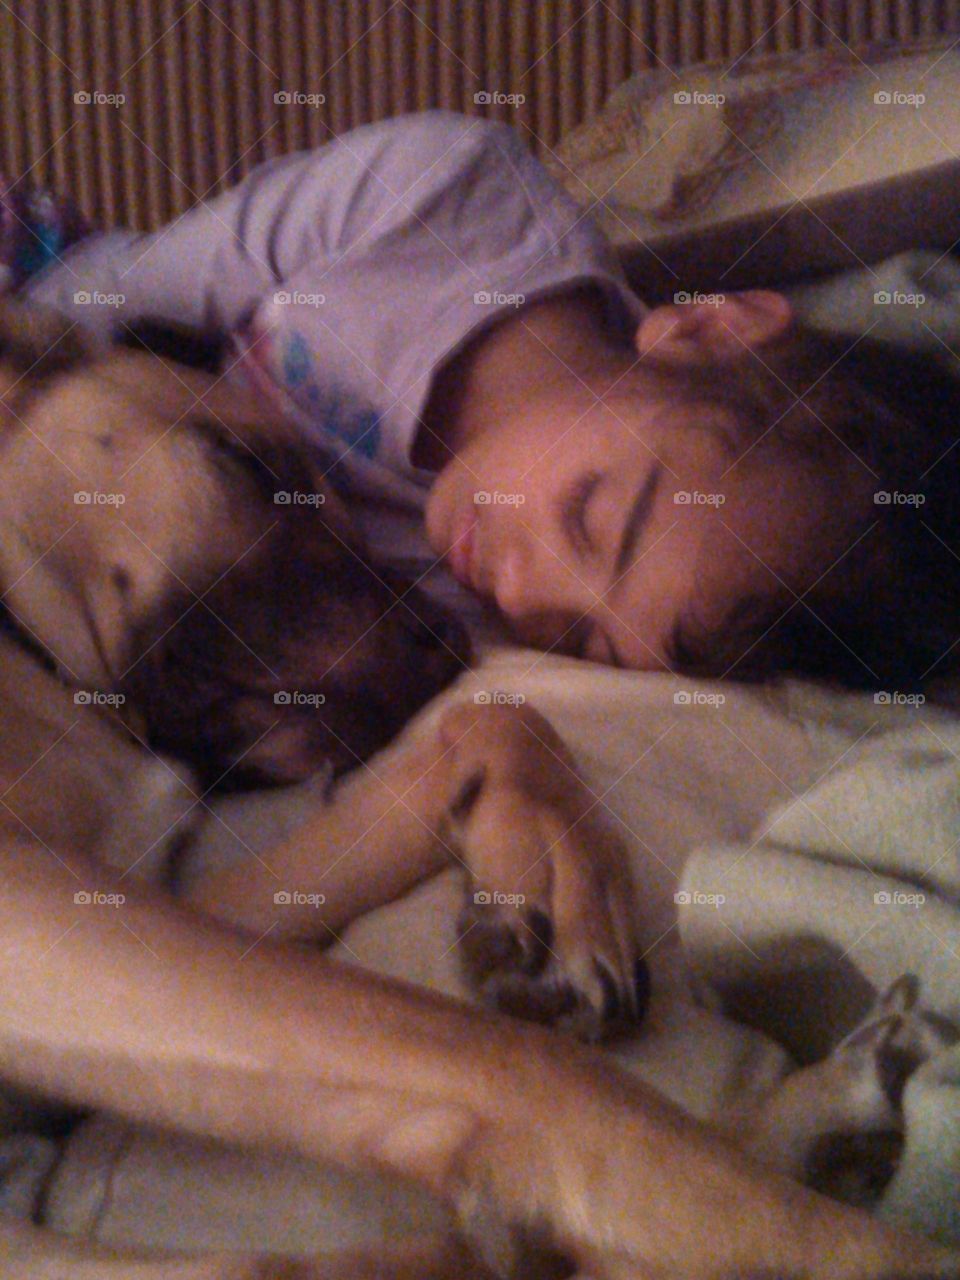 best friends. after a long movie day at home. the two of them passed out on me lol.